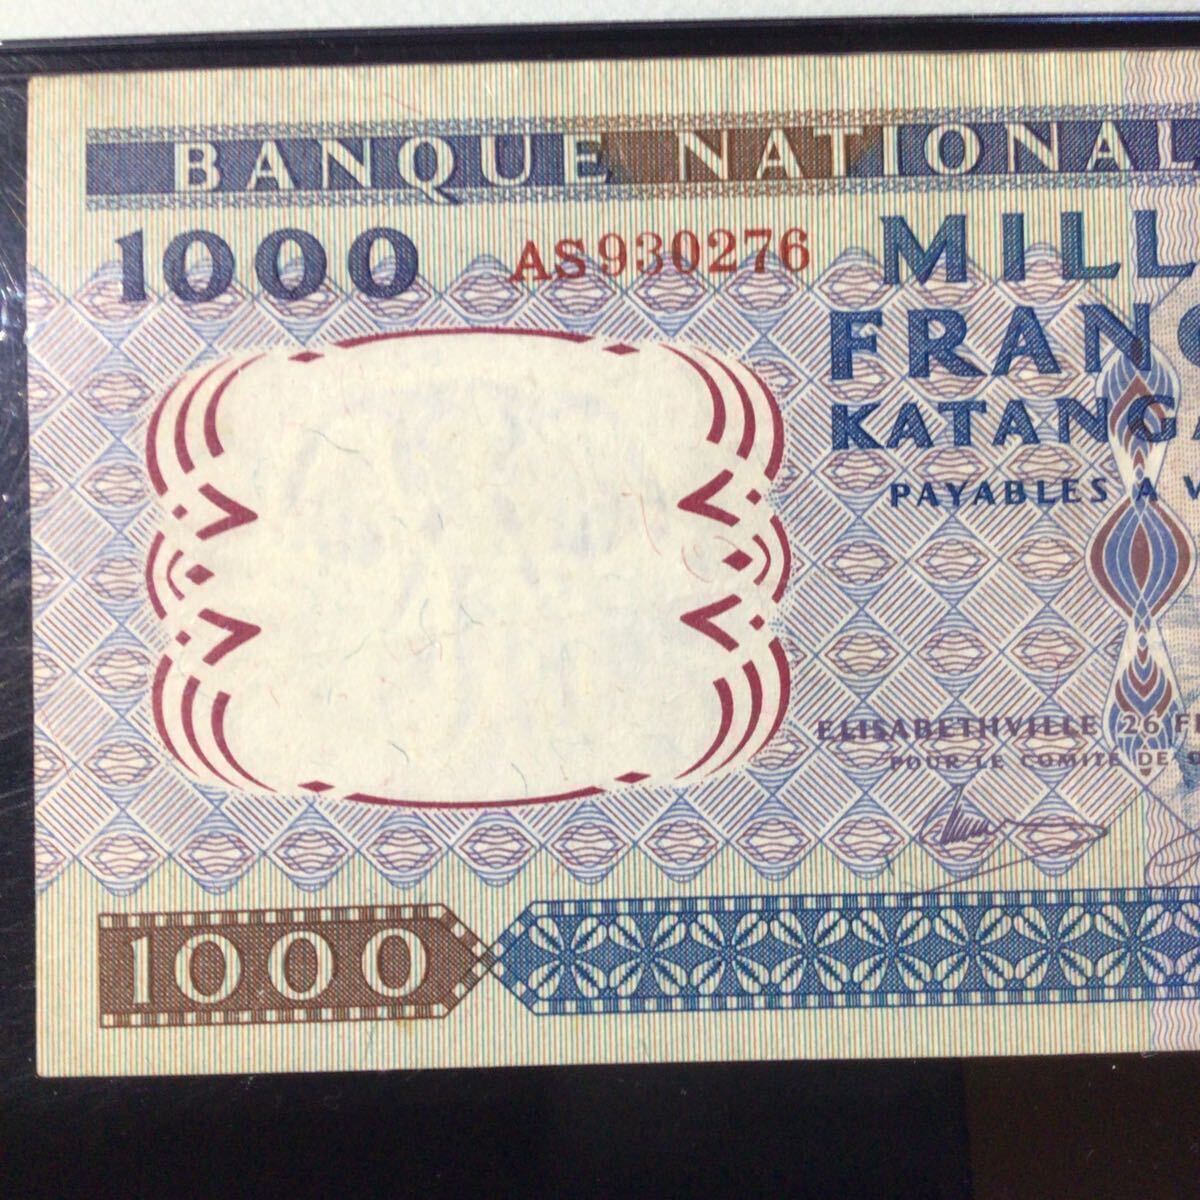 World Banknote Grading KATANGA《Banque Nationale》1000 Francs【1962】『PMG Grading Choice Very Fine 35』_画像4